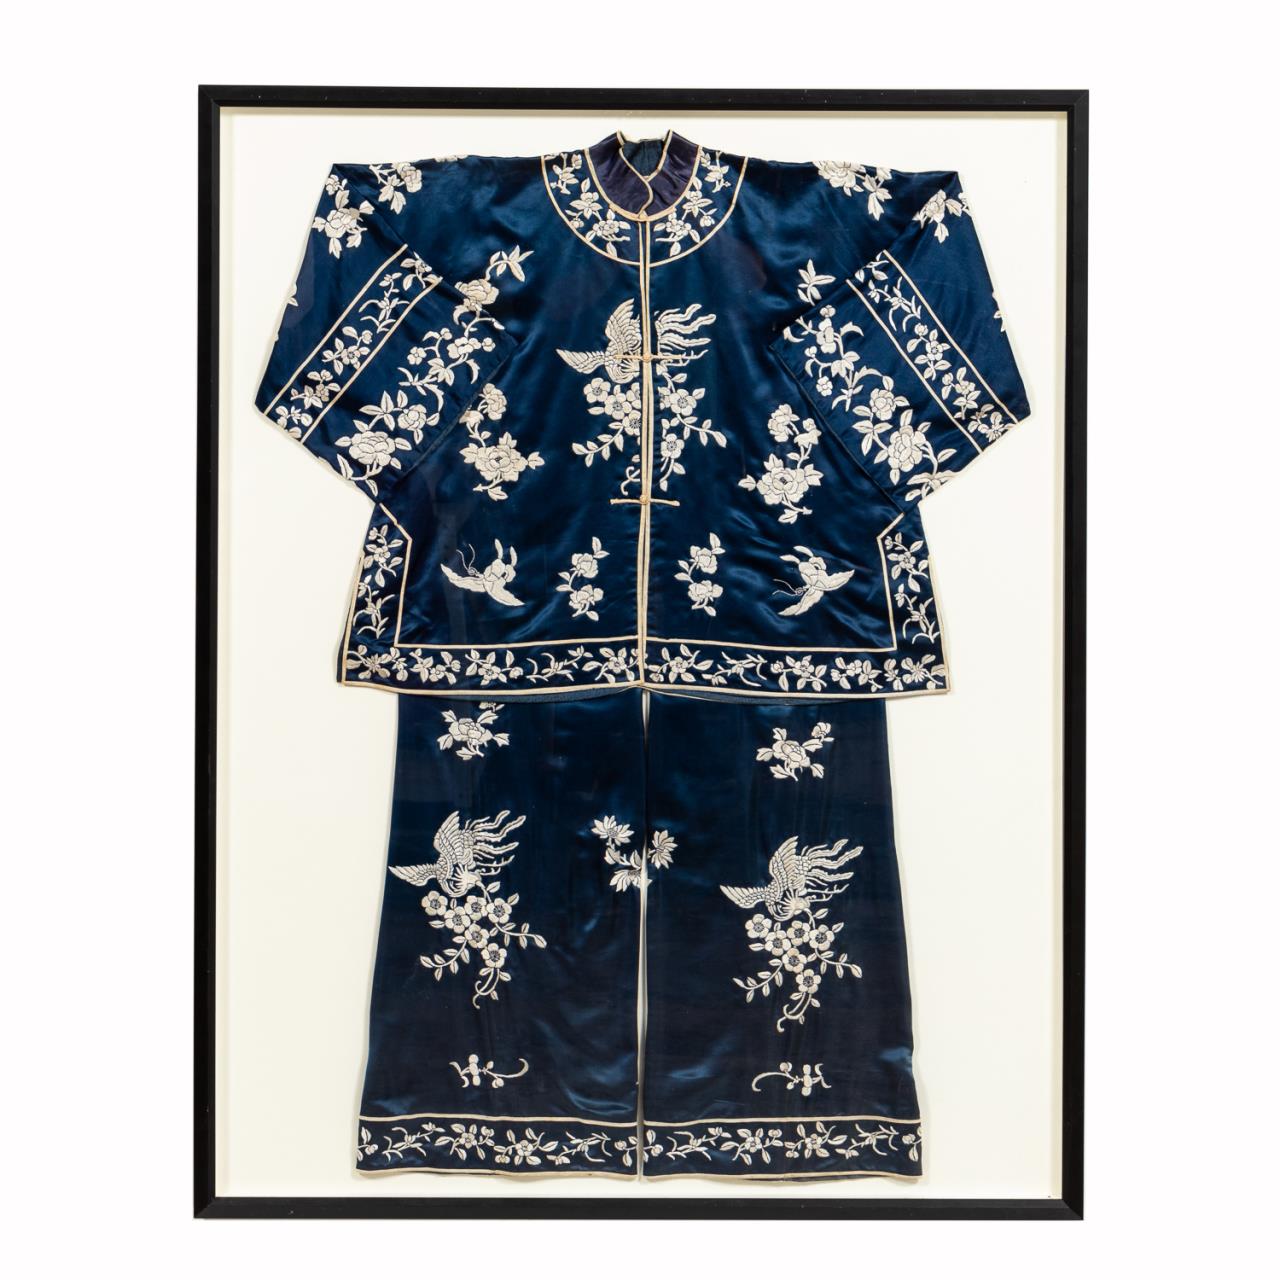 CHINESE FRAMED BLUE EMBROIDERY 35d810